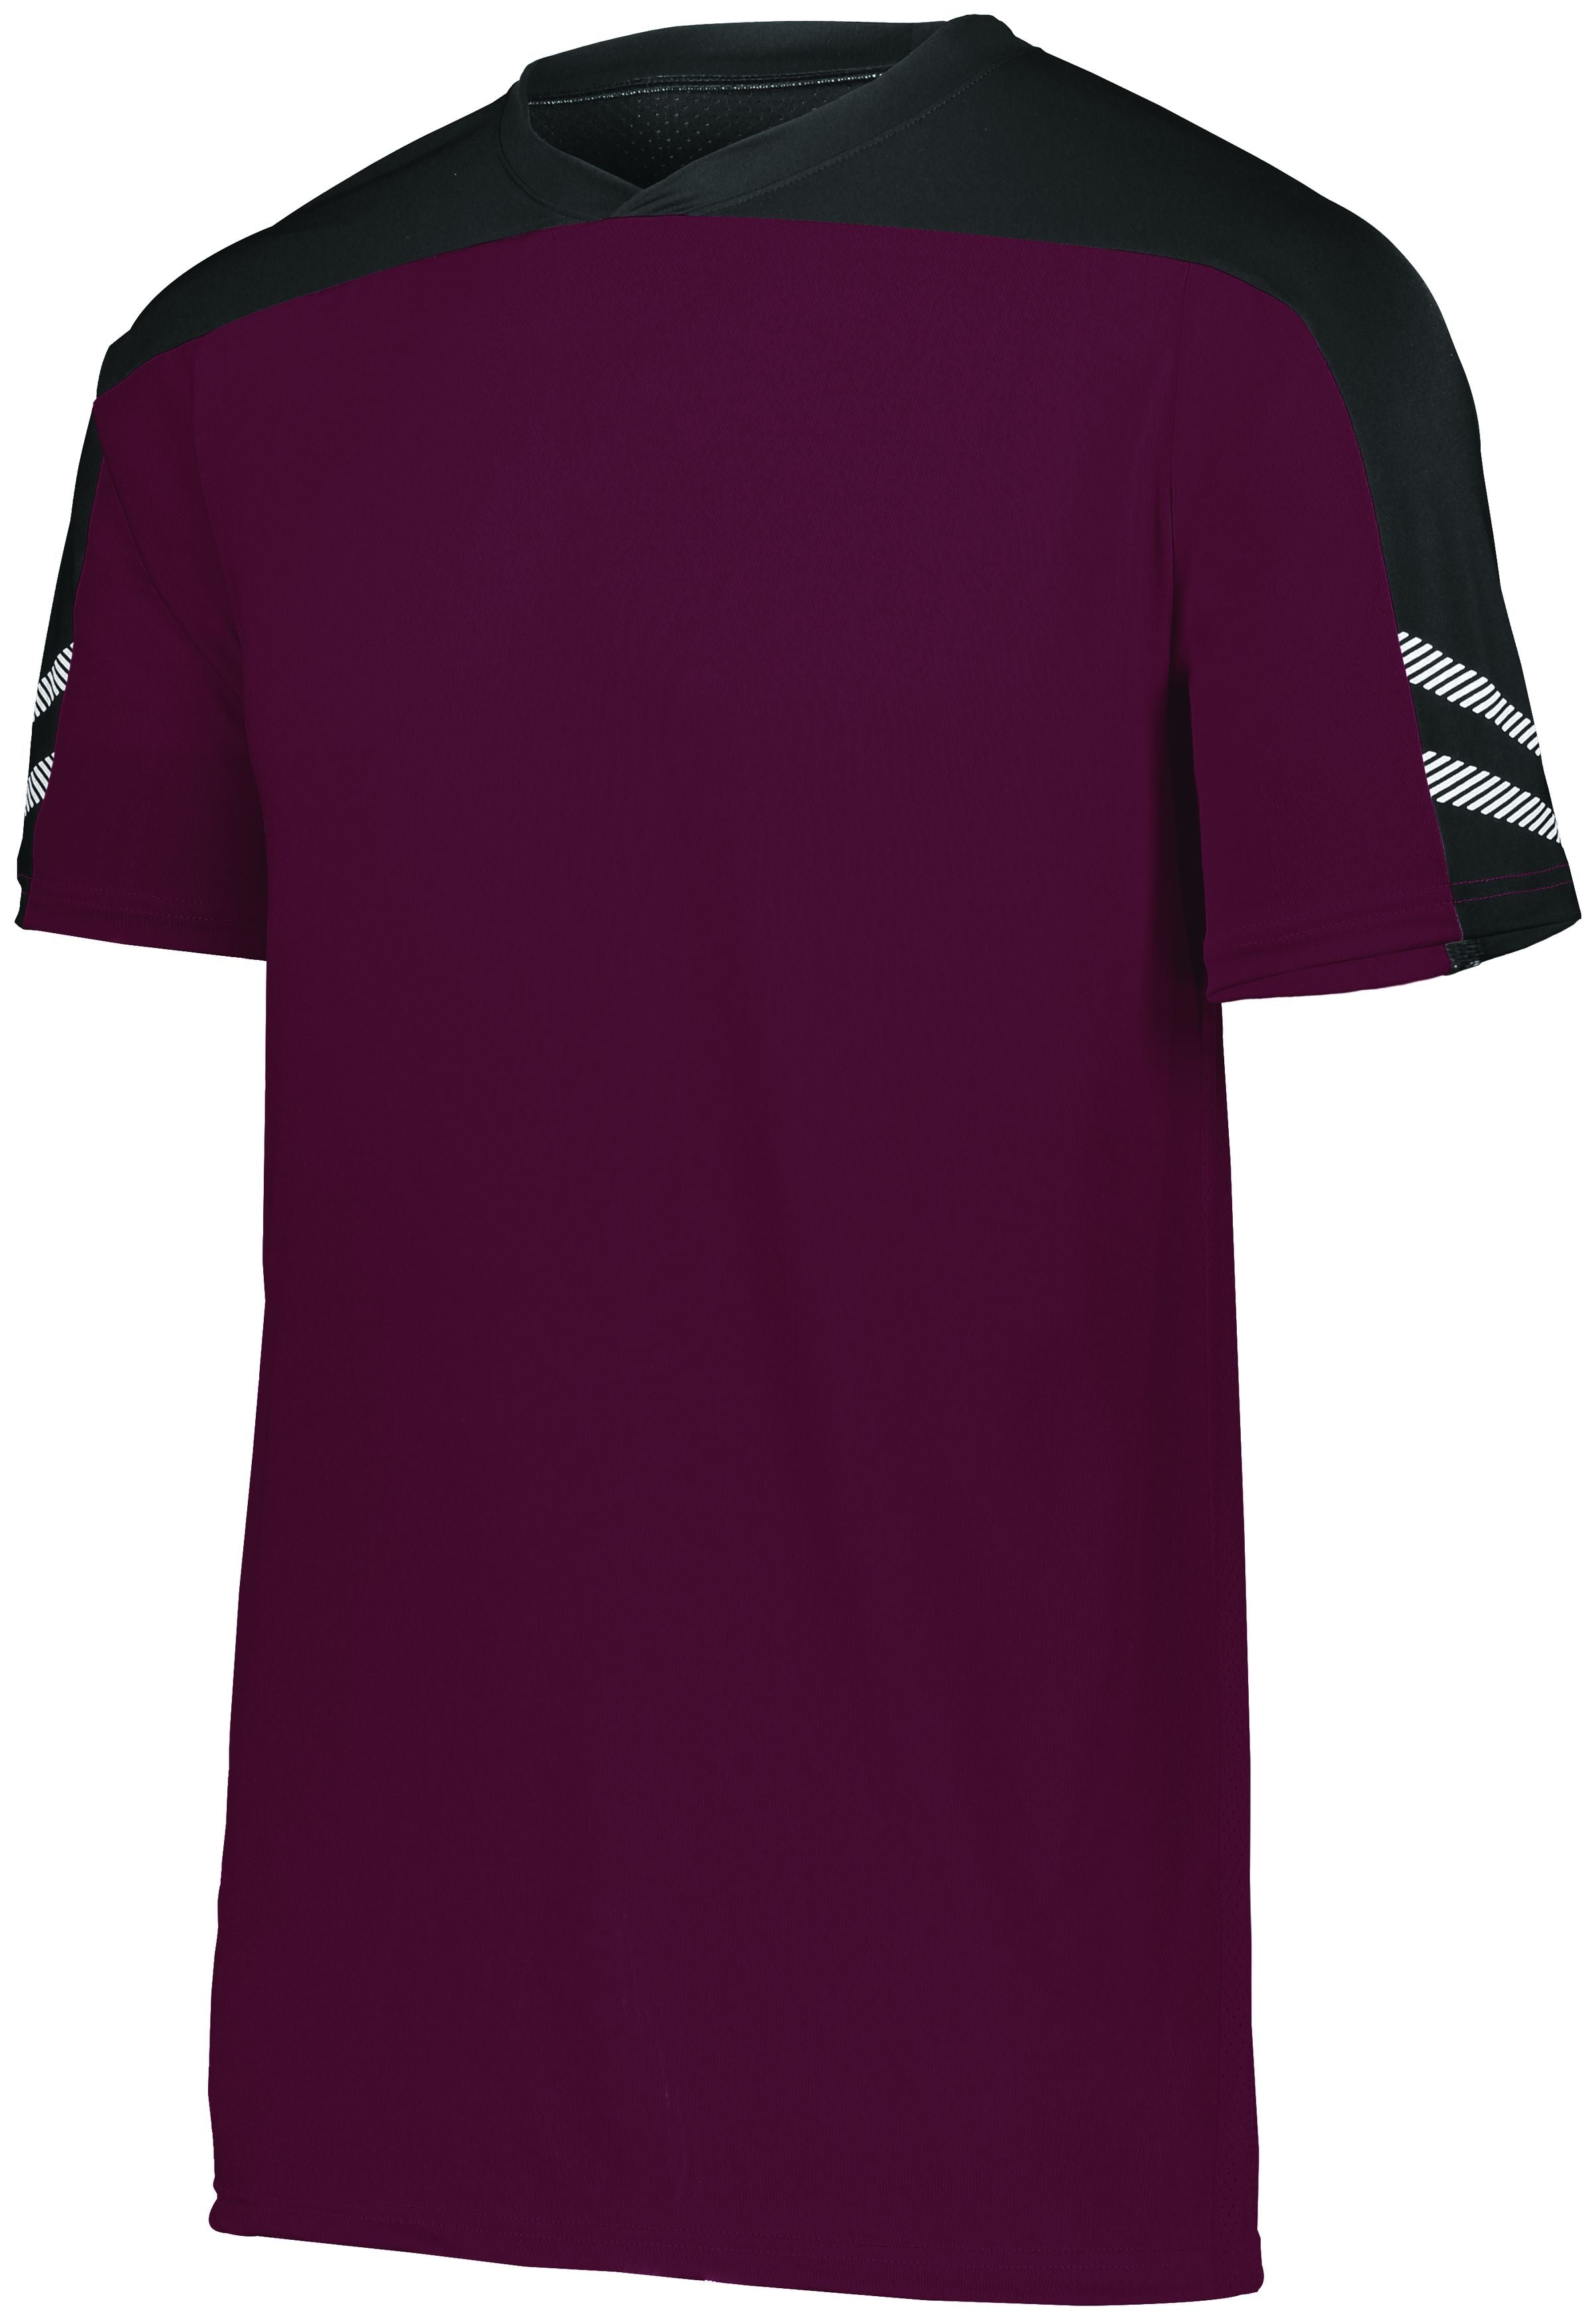 High 5 Youth Anfield Soccer Jersey in Maroon/Black/White  -Part of the Youth, Youth-Jersey, High5-Products, Soccer, Shirts, All-Sports-1 product lines at KanaleyCreations.com